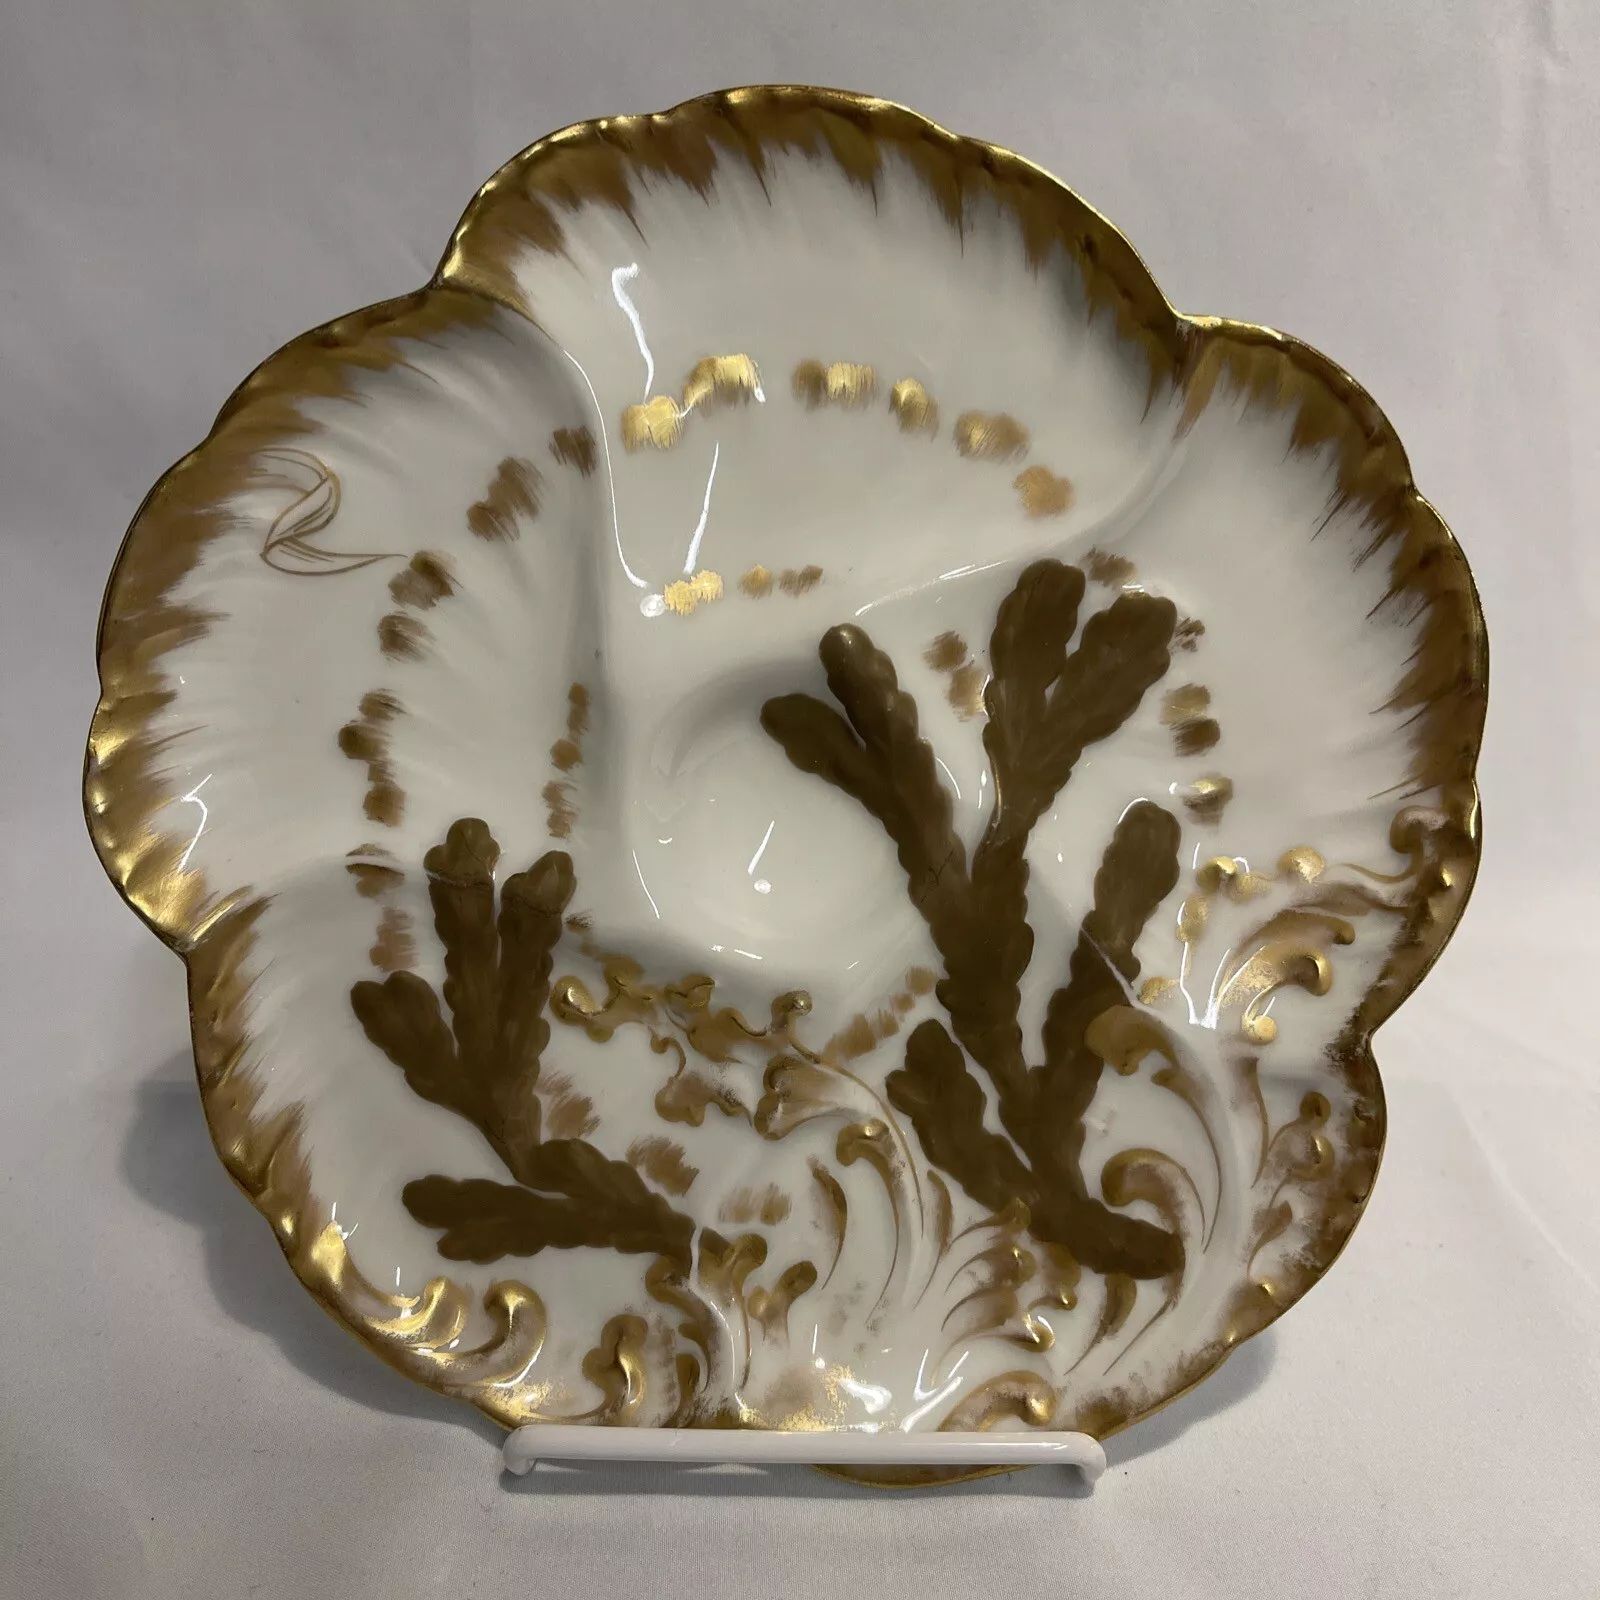 Antique Charles Field Haviland Limoges Oyster Plate Circa 1882-1890 | eBay US